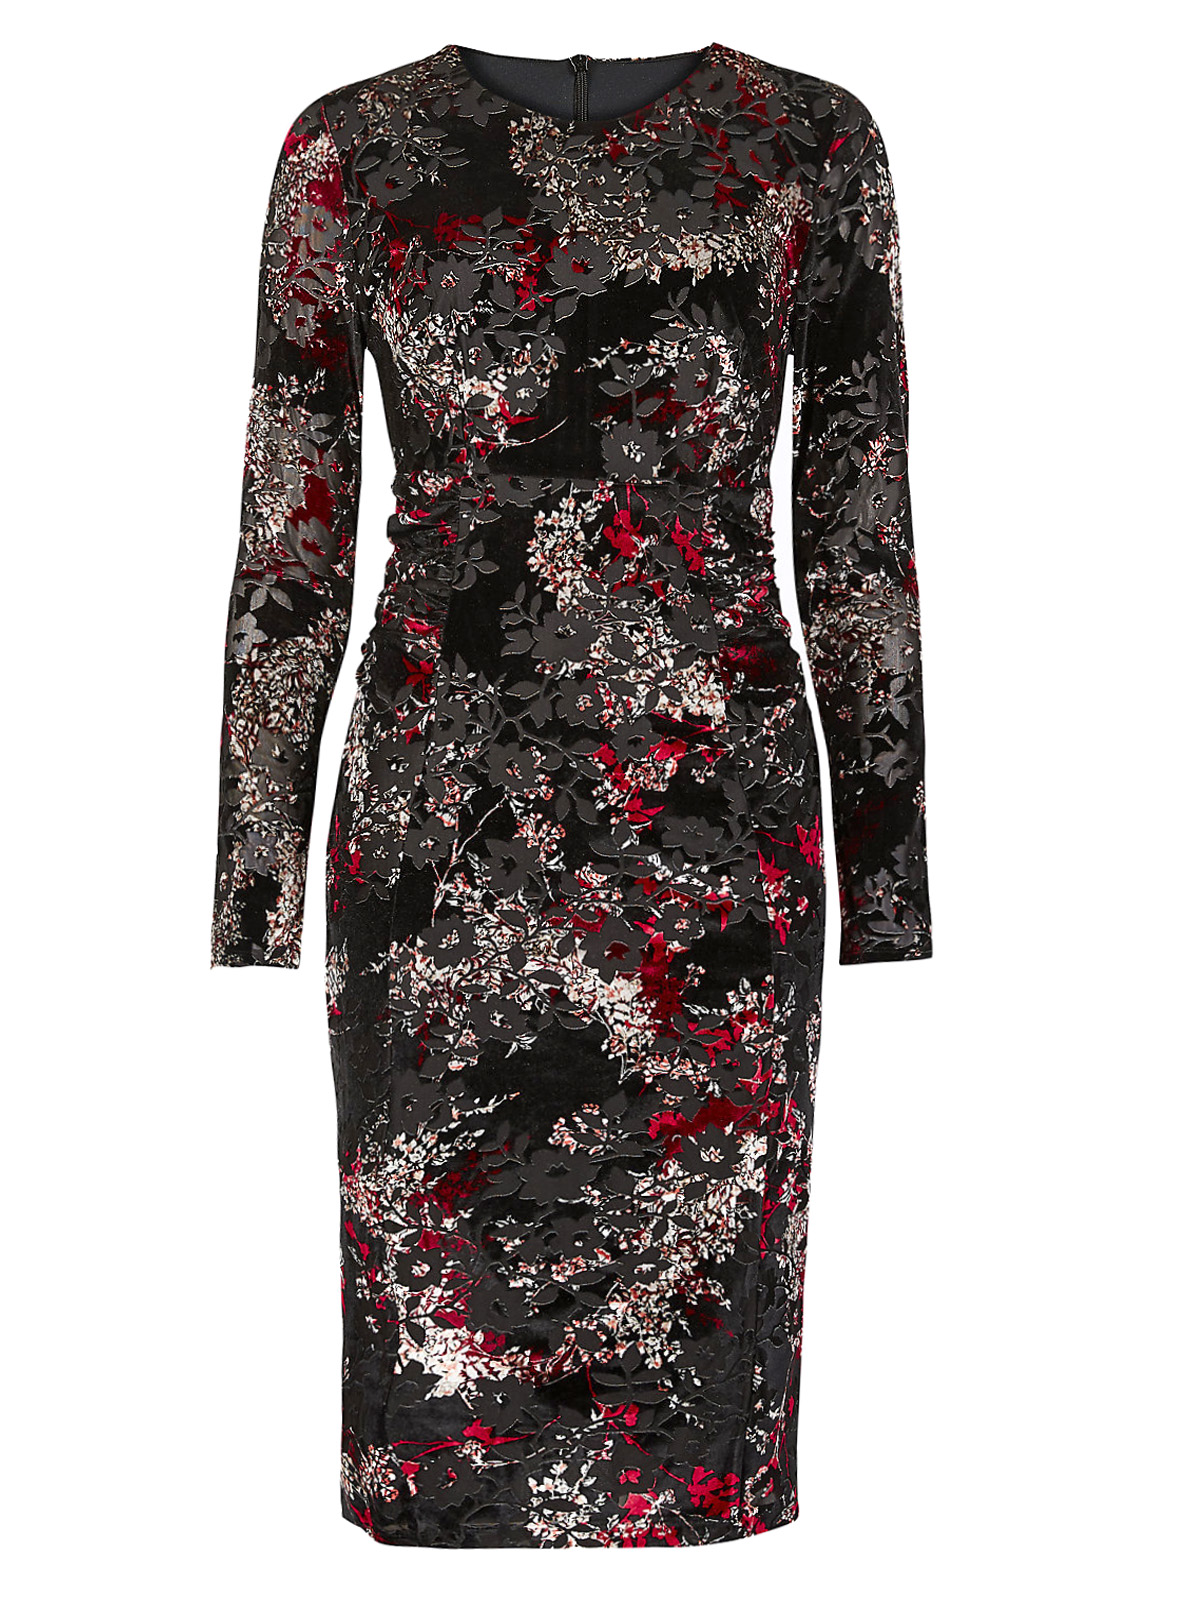 Marks and Spencer - - M&5 BLACK Floral Print Long Sleeve Bodycon Dress ...